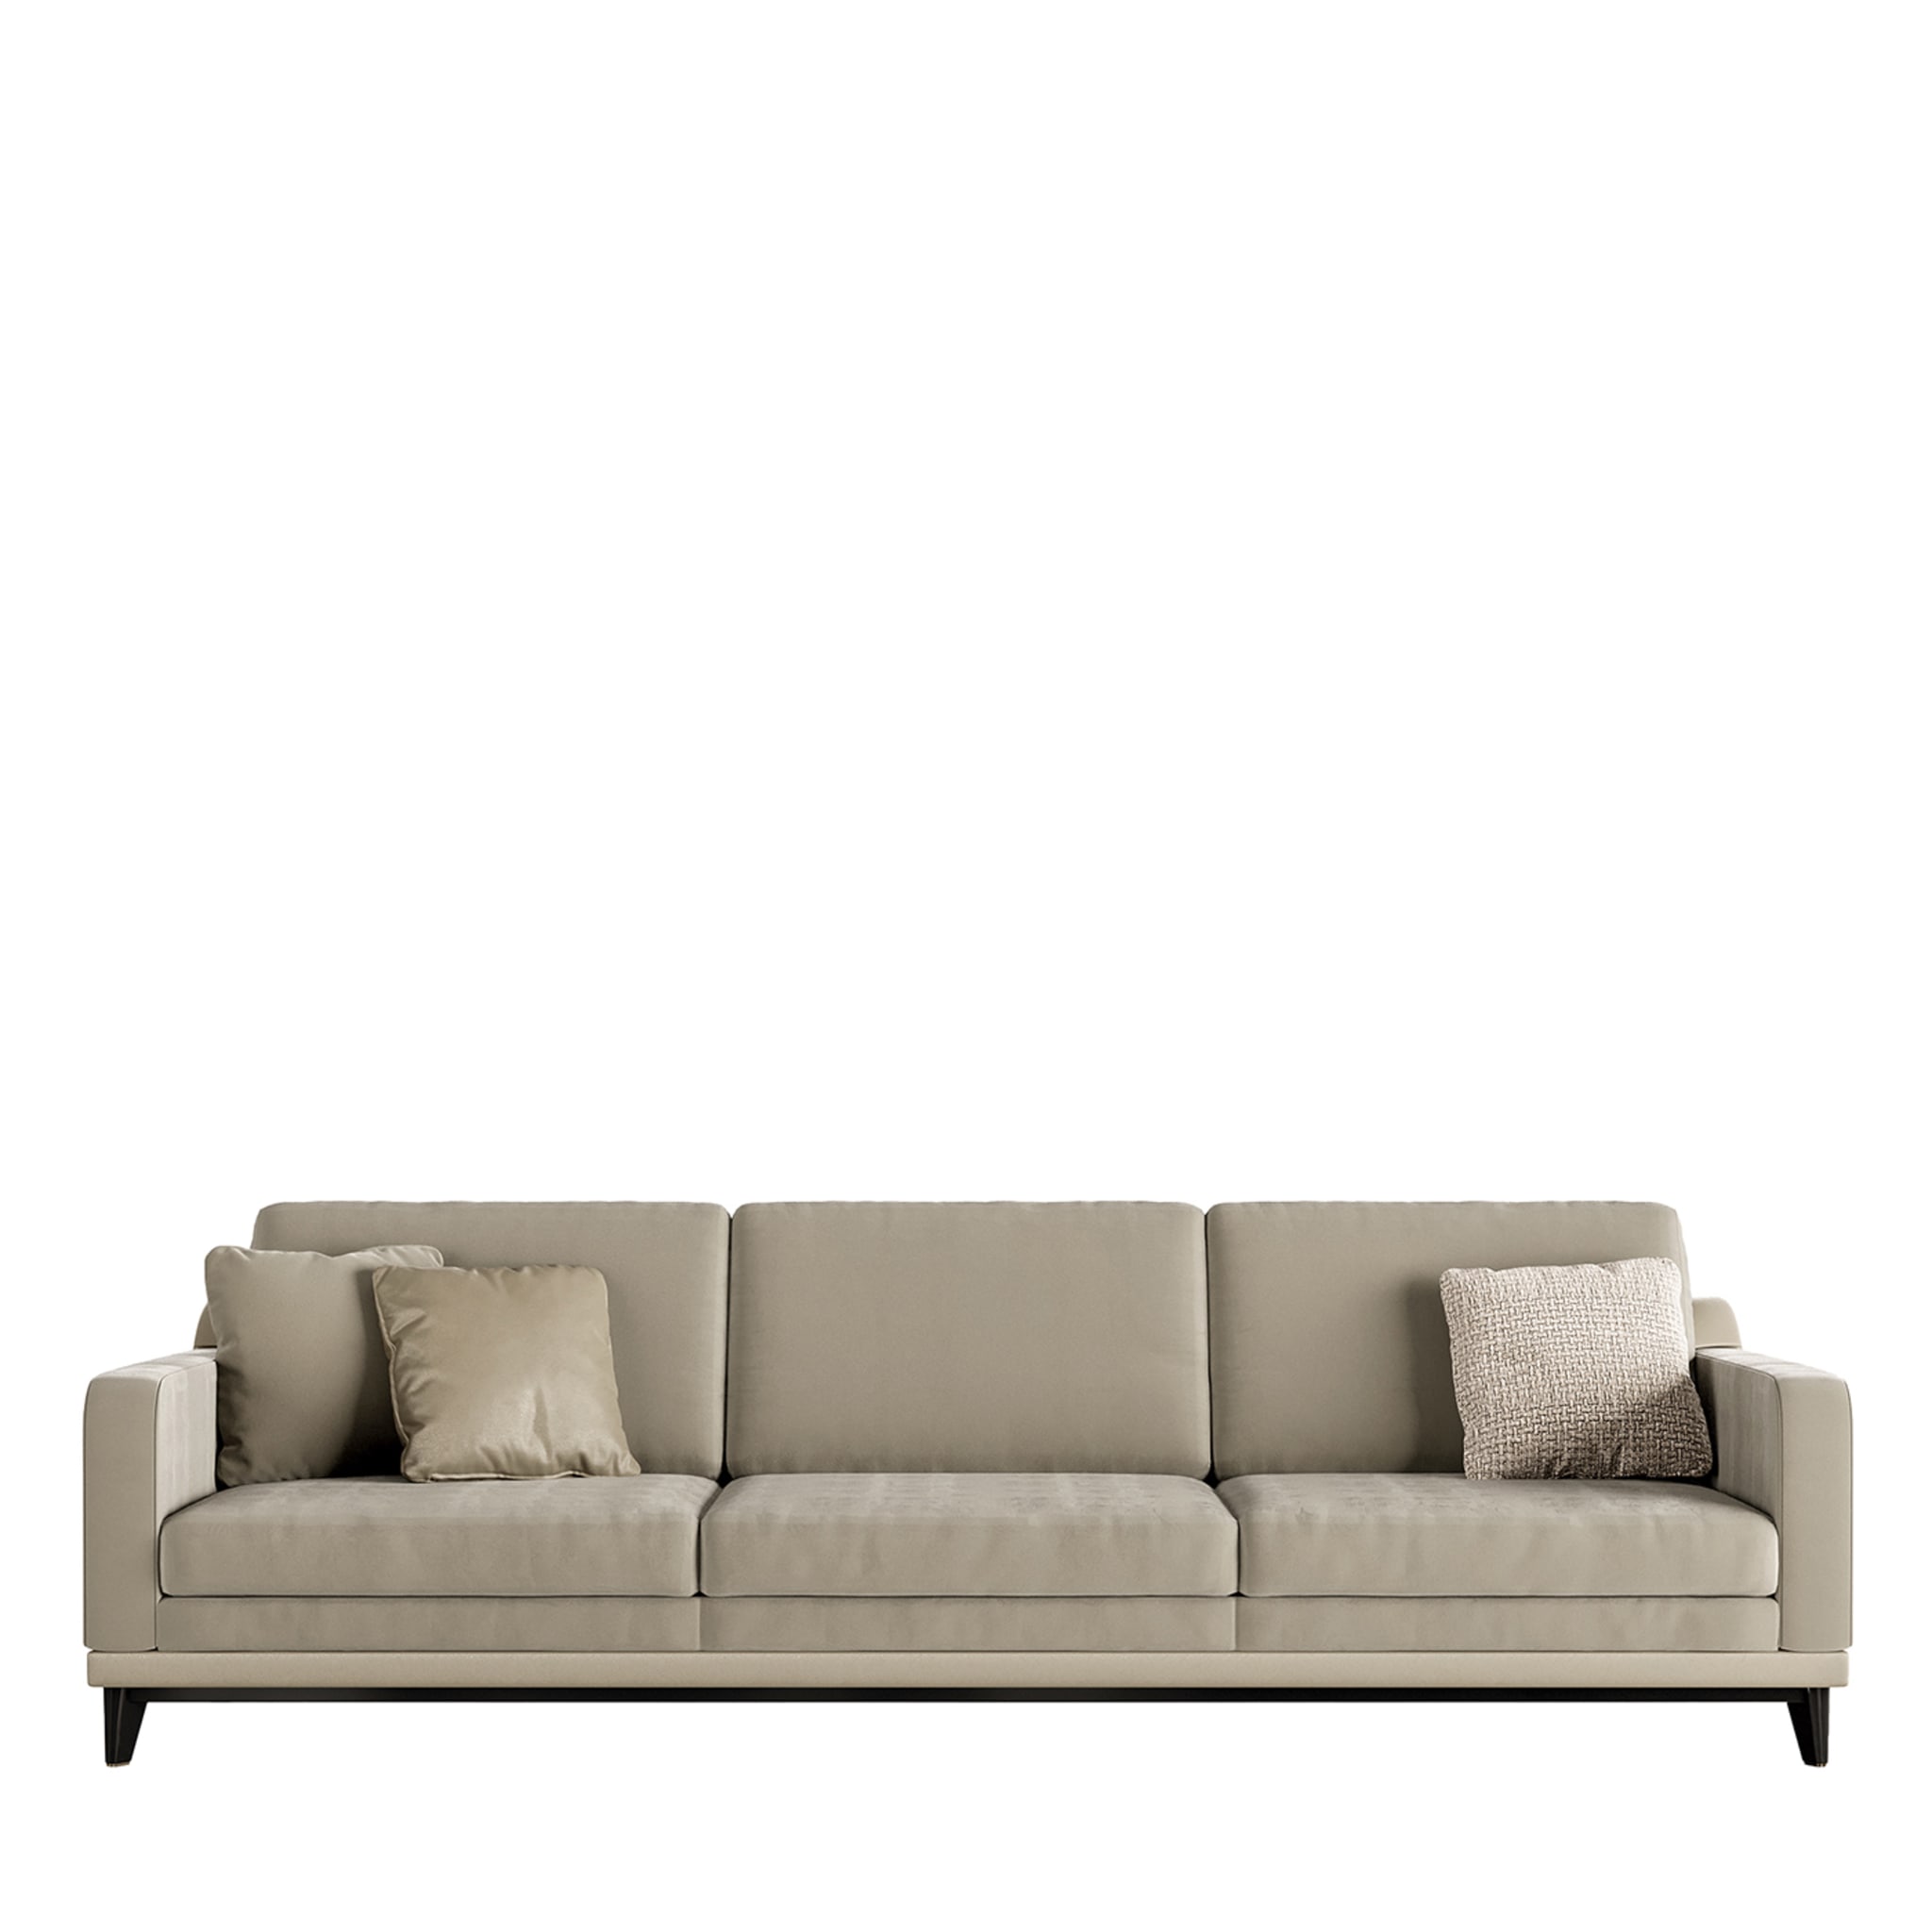 Beige Leather 3-Seat Sofa - Main view